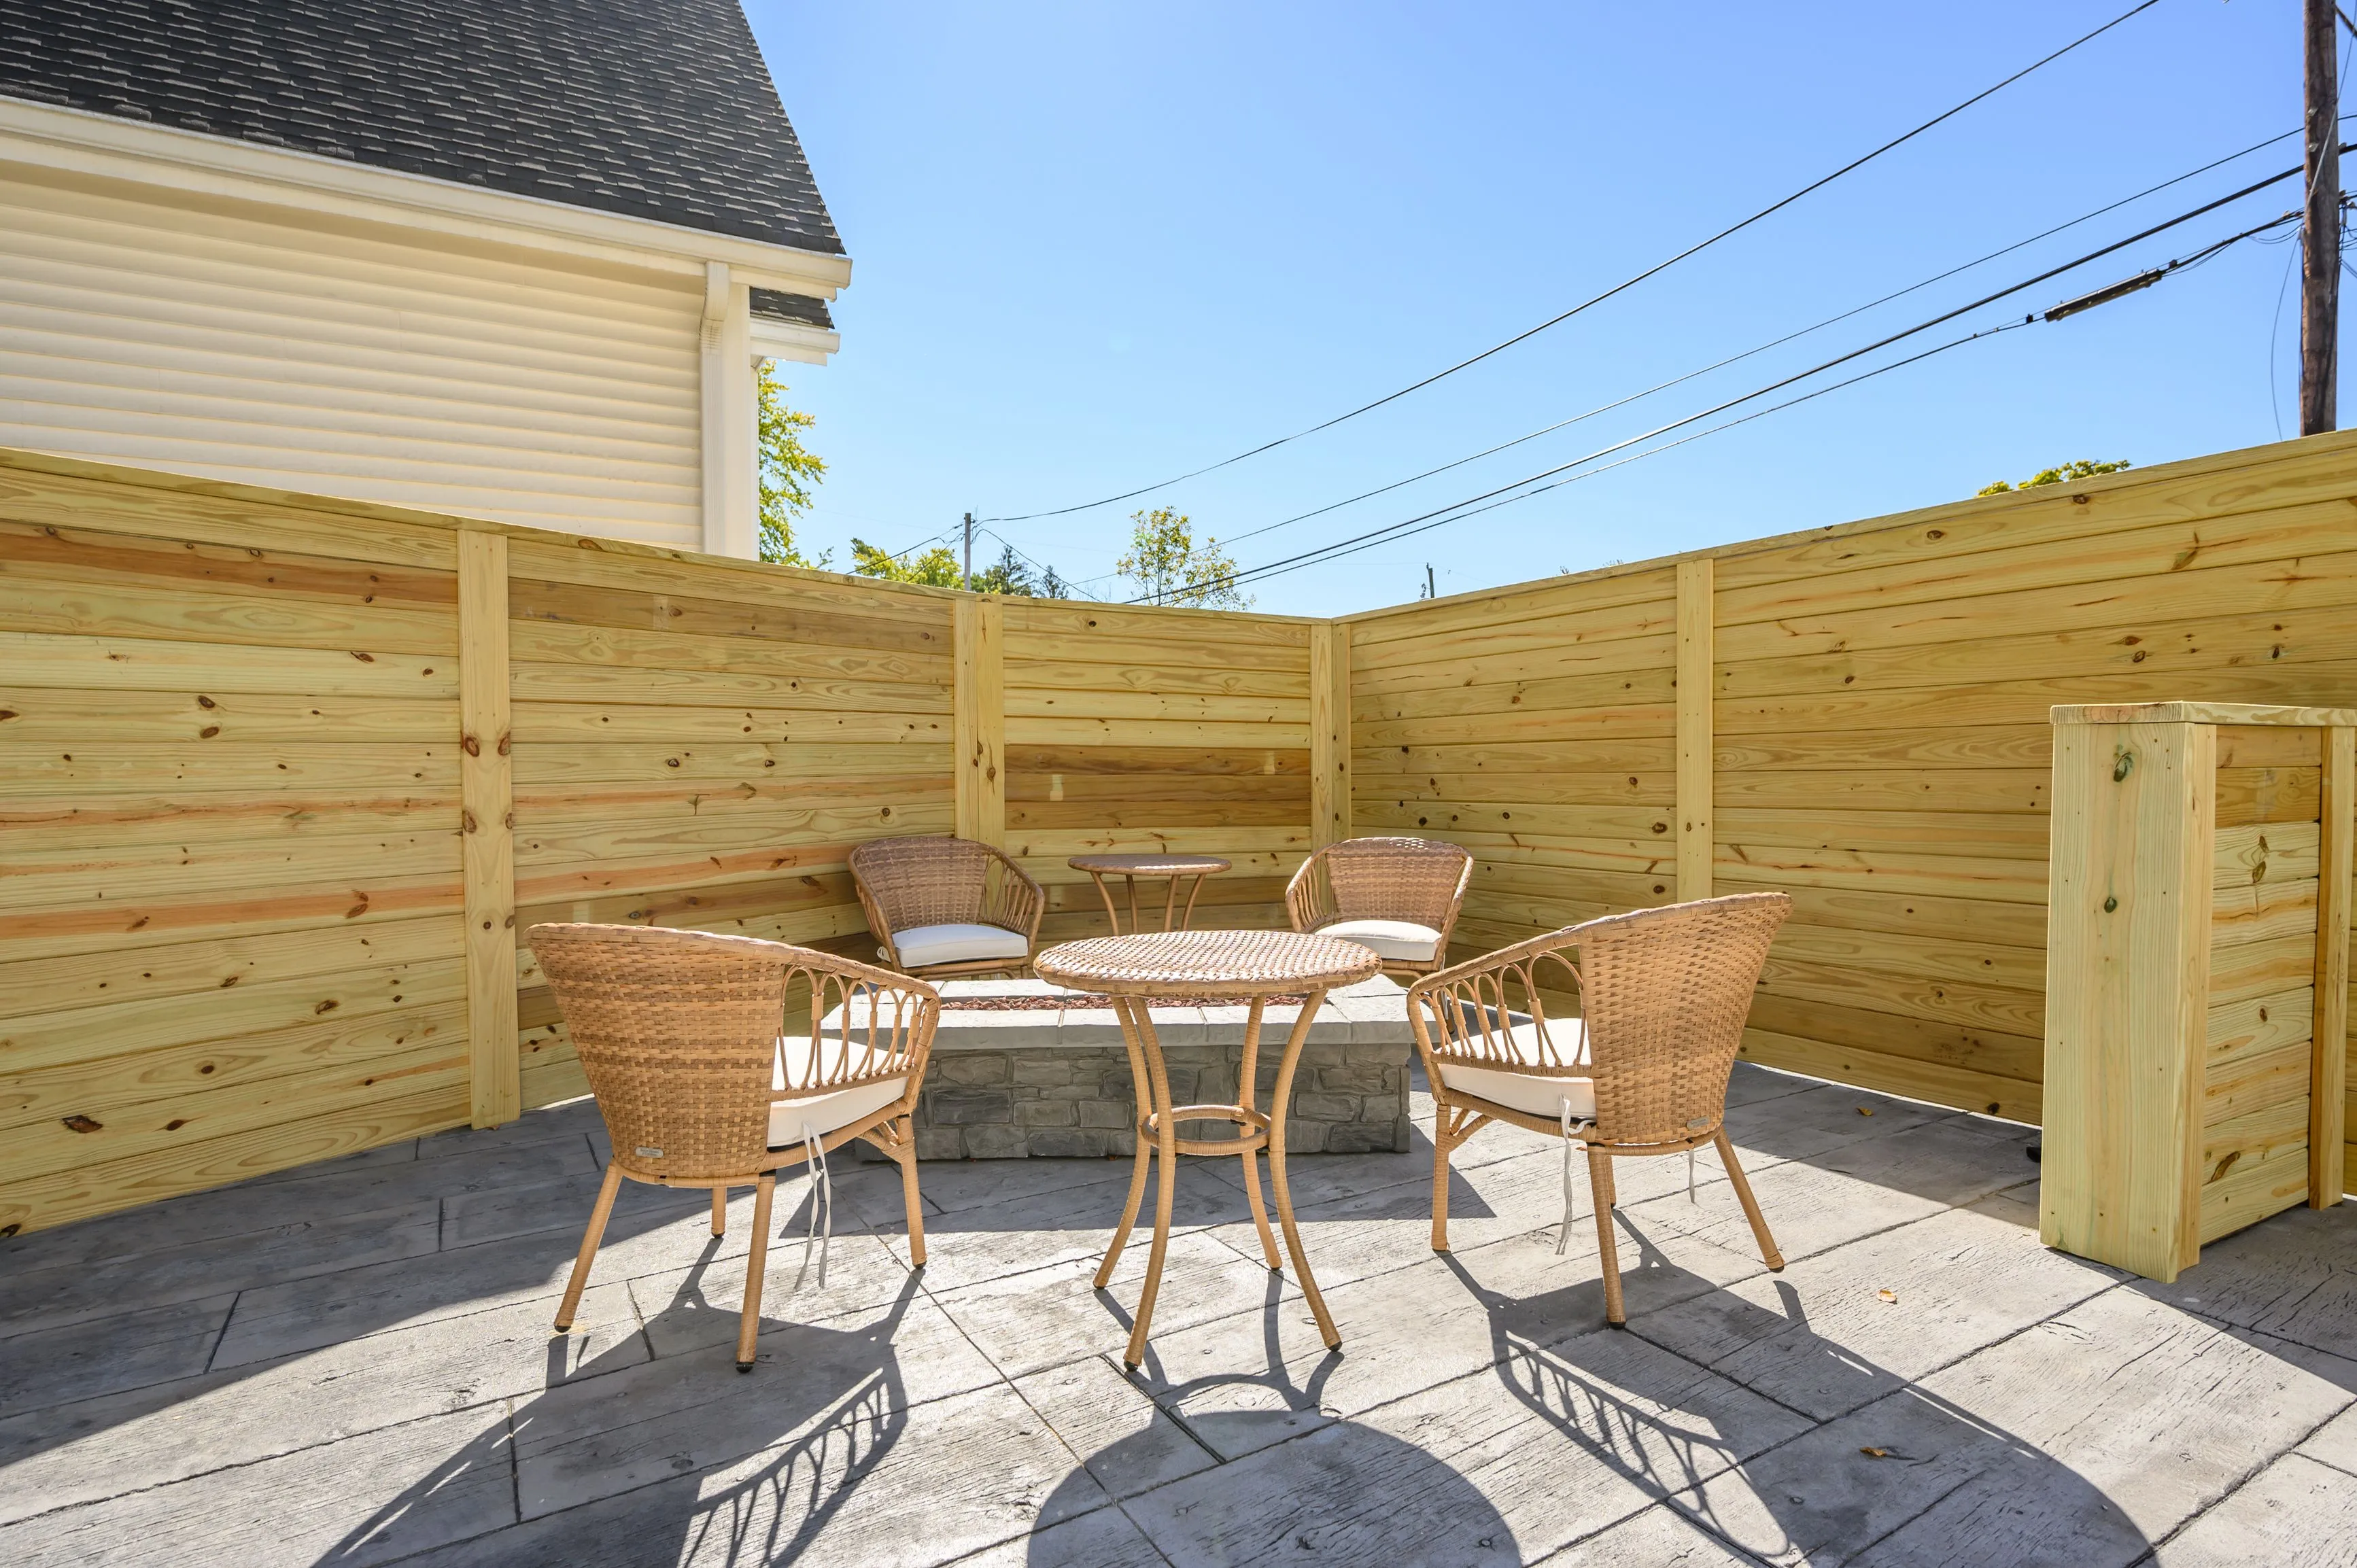 Outdoor patio area with a wooden fence, stone flooring, and a set of wicker chairs around a small round table.